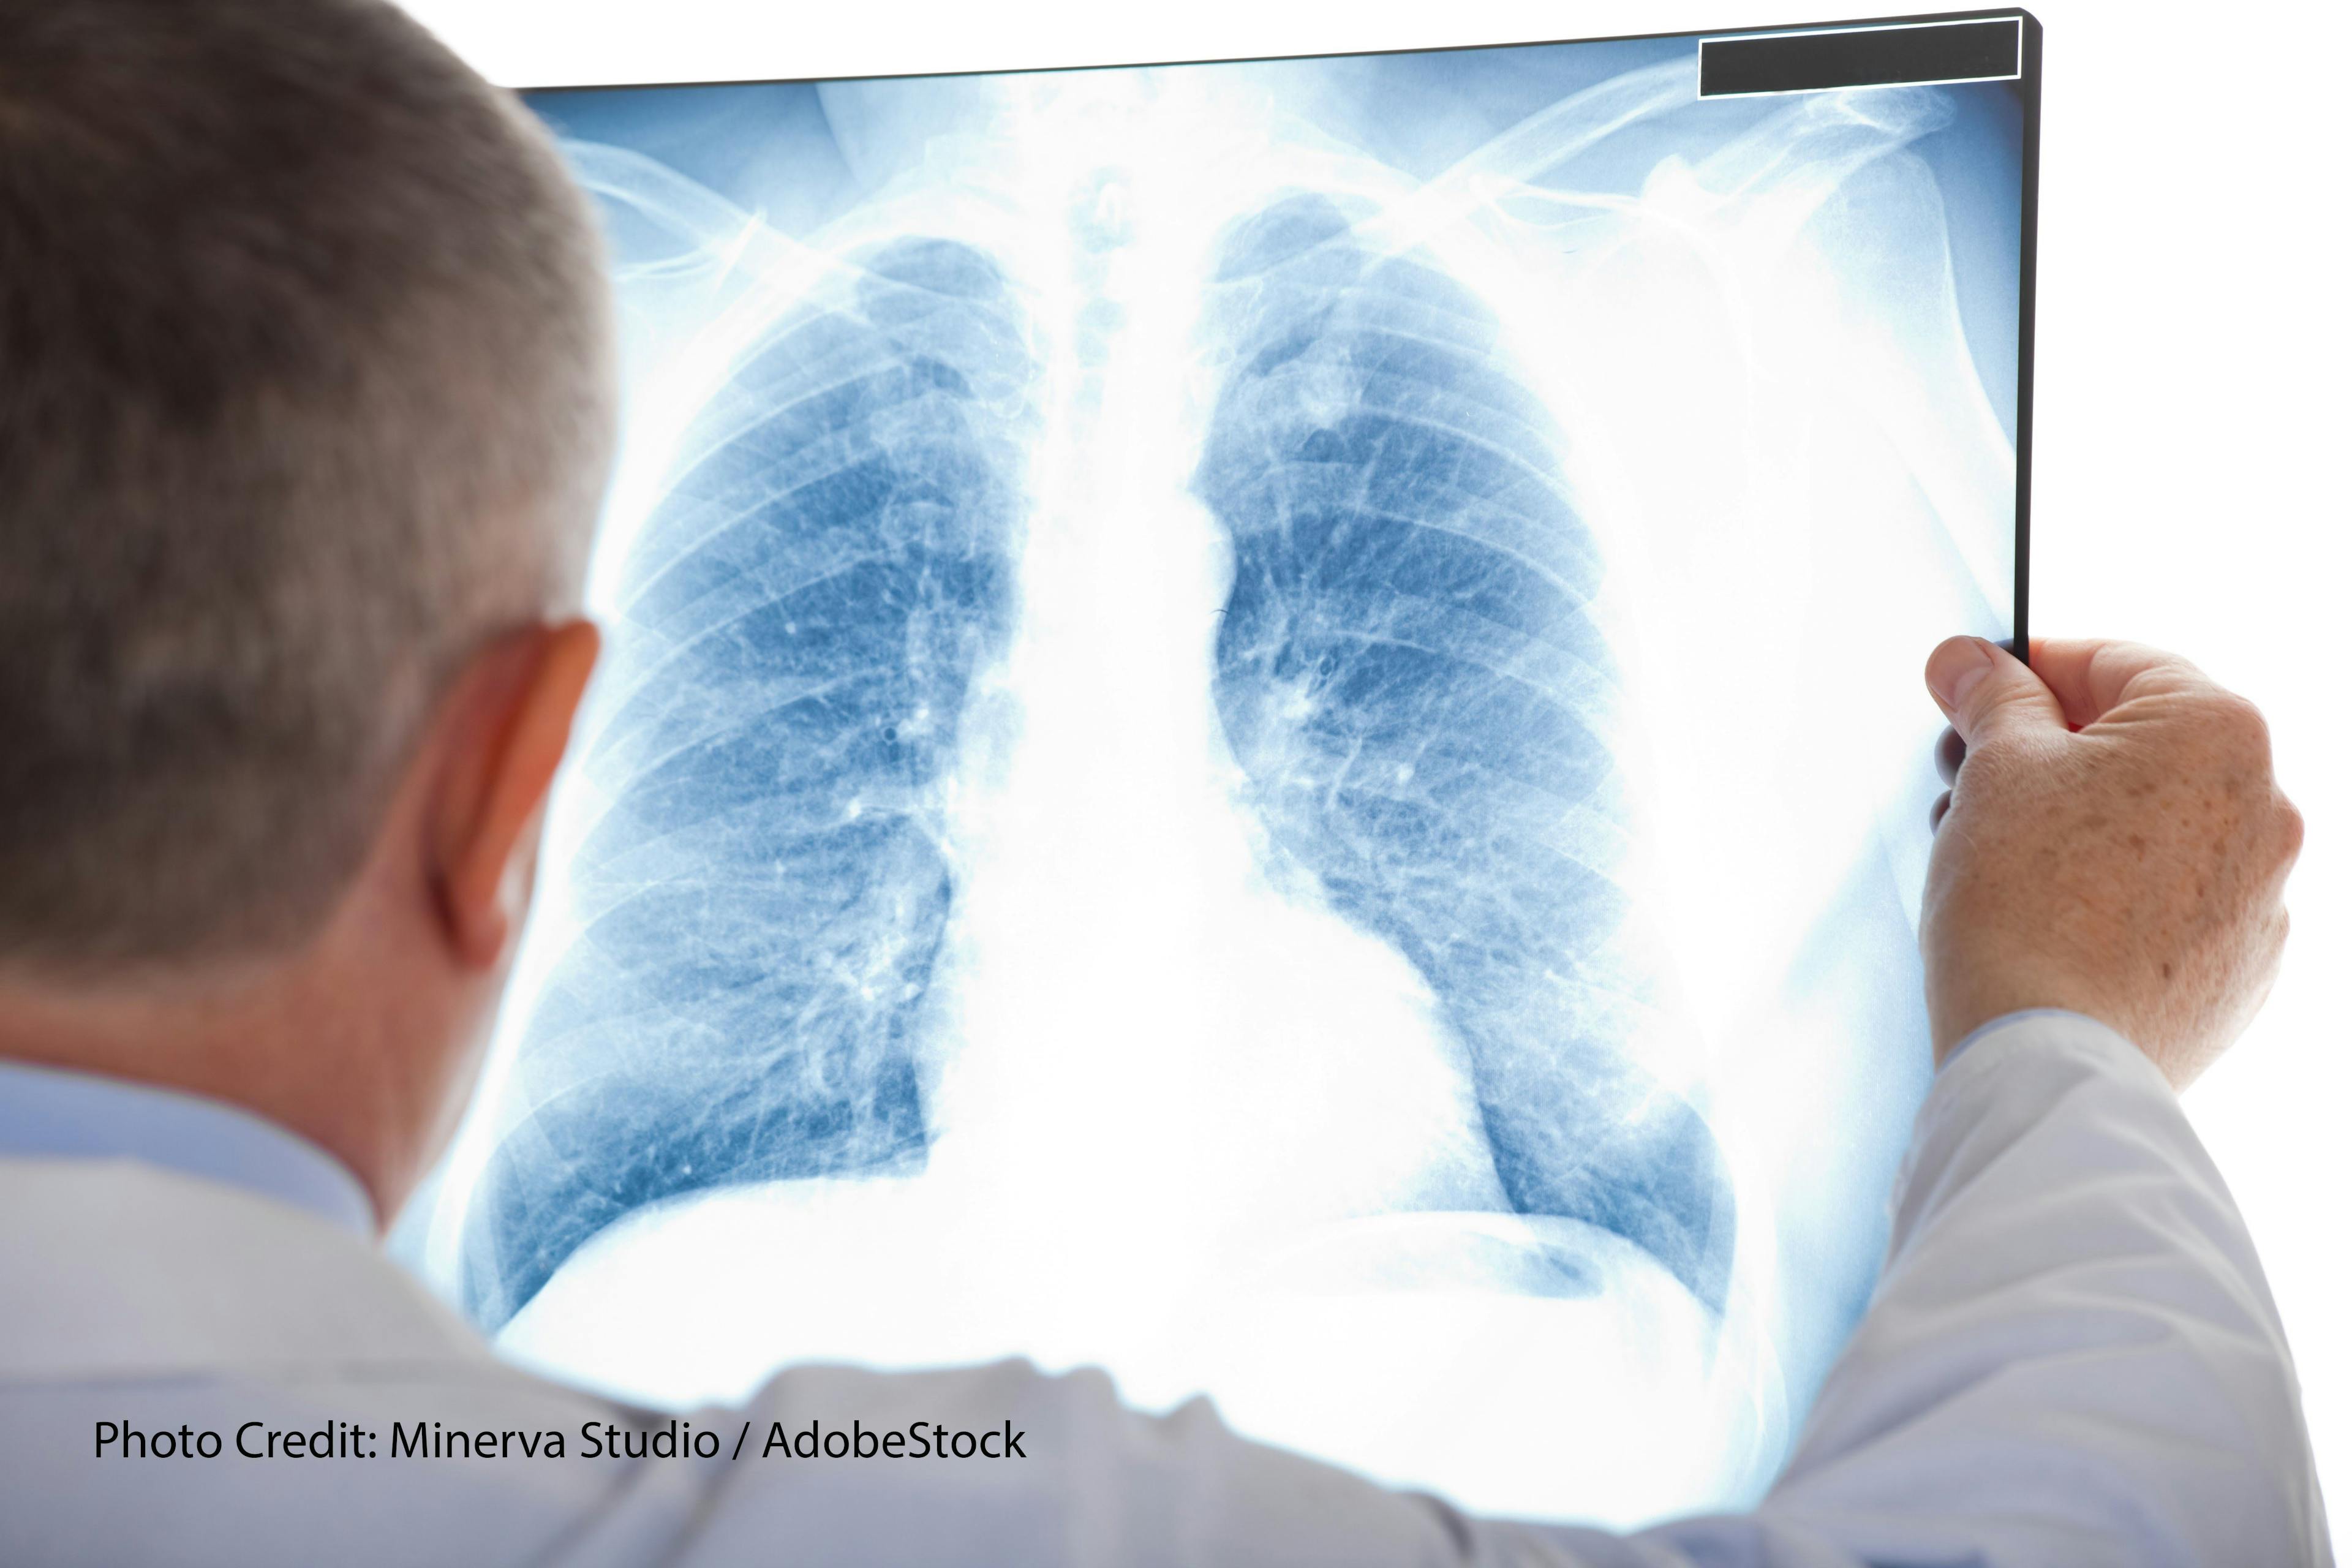 NCCN: Updated NSCLC Guidelines Hone in on PD-L1 Testing